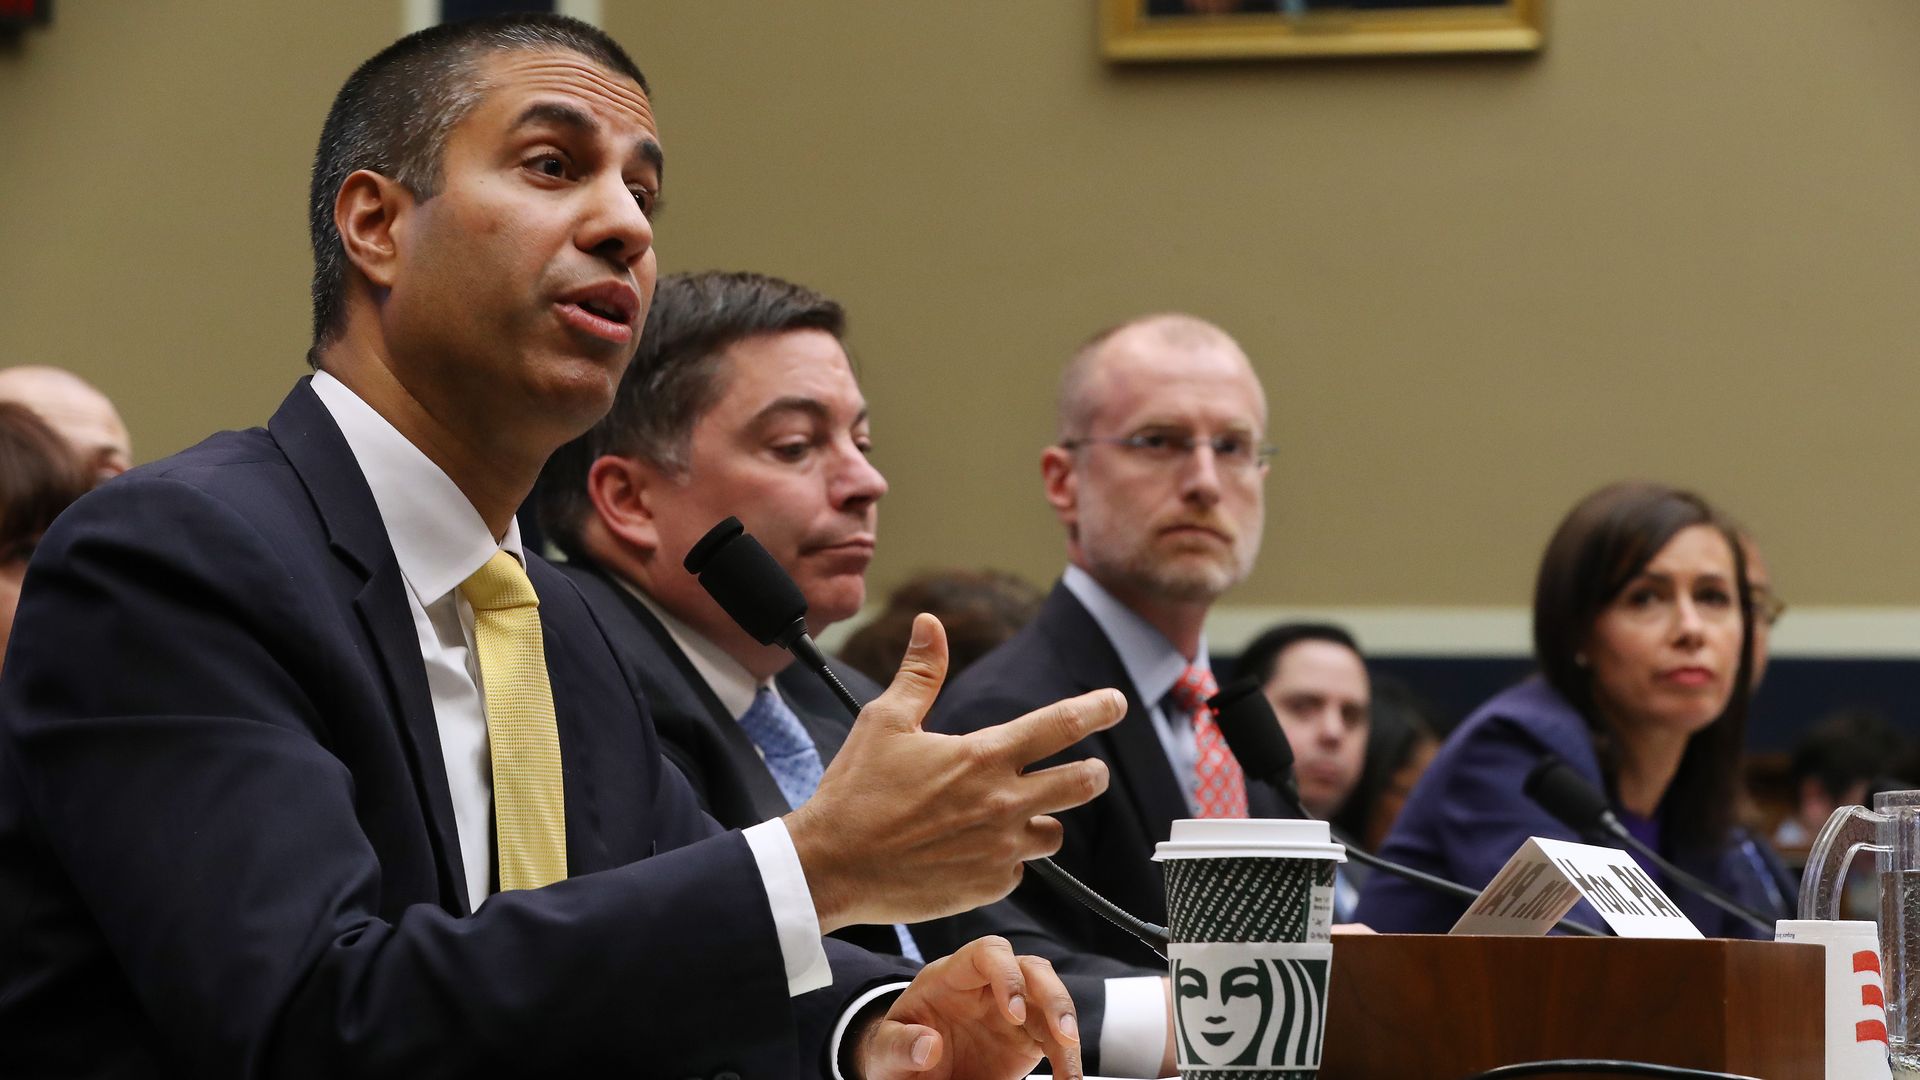 FCC commissioners testify before Congress in December.